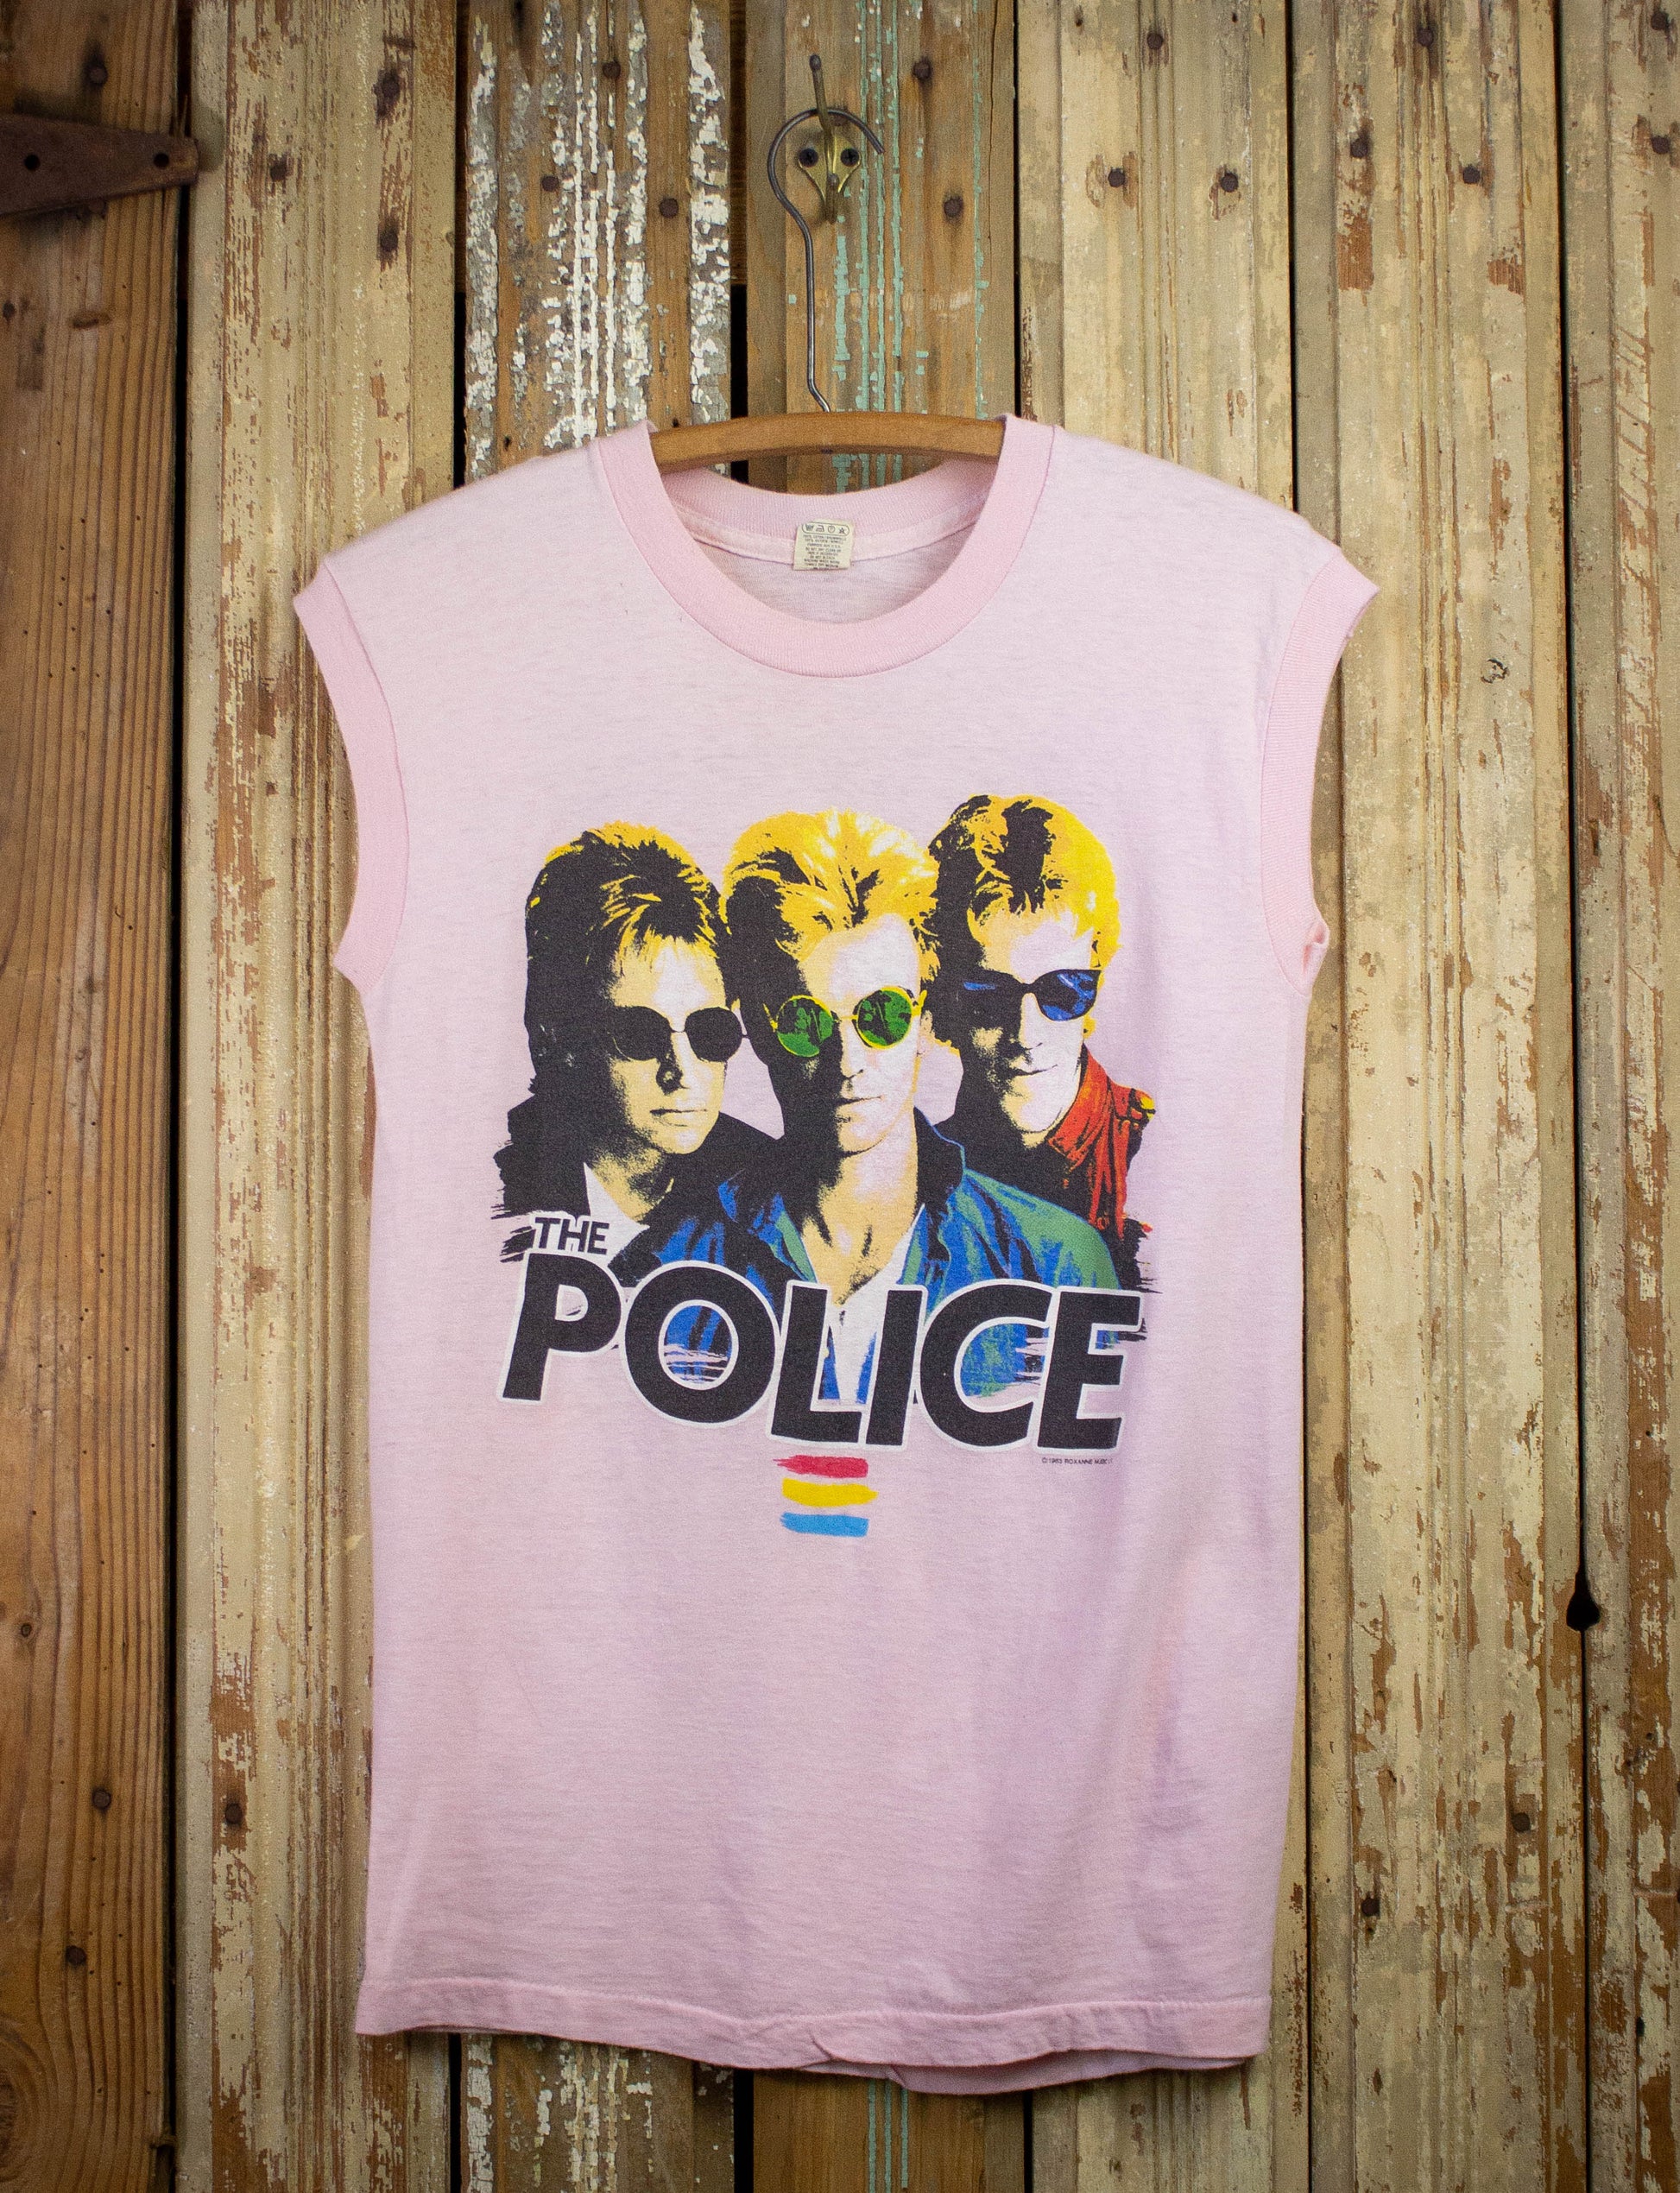 Vintage Police North American Tour Muscle Concert T Shirt 1983 Pink Medium